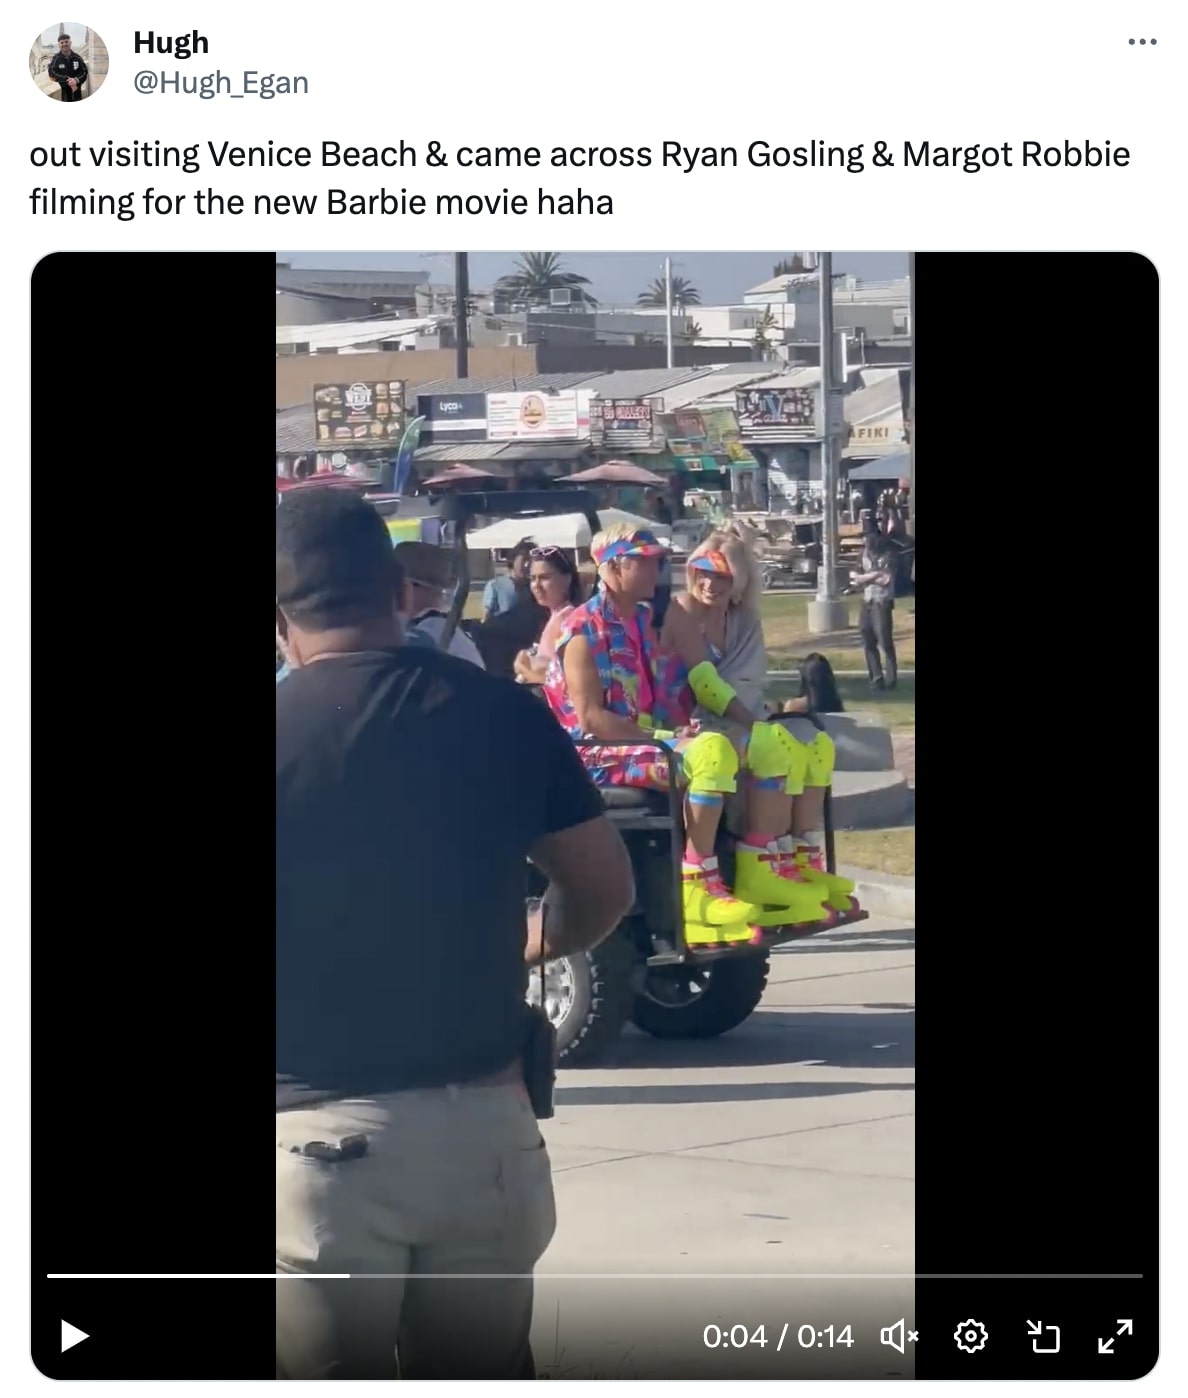 Twitter user Hugh posted a picture of Ryan Gosling and Margot Robbie while filming Barbie movie on Venice Beach